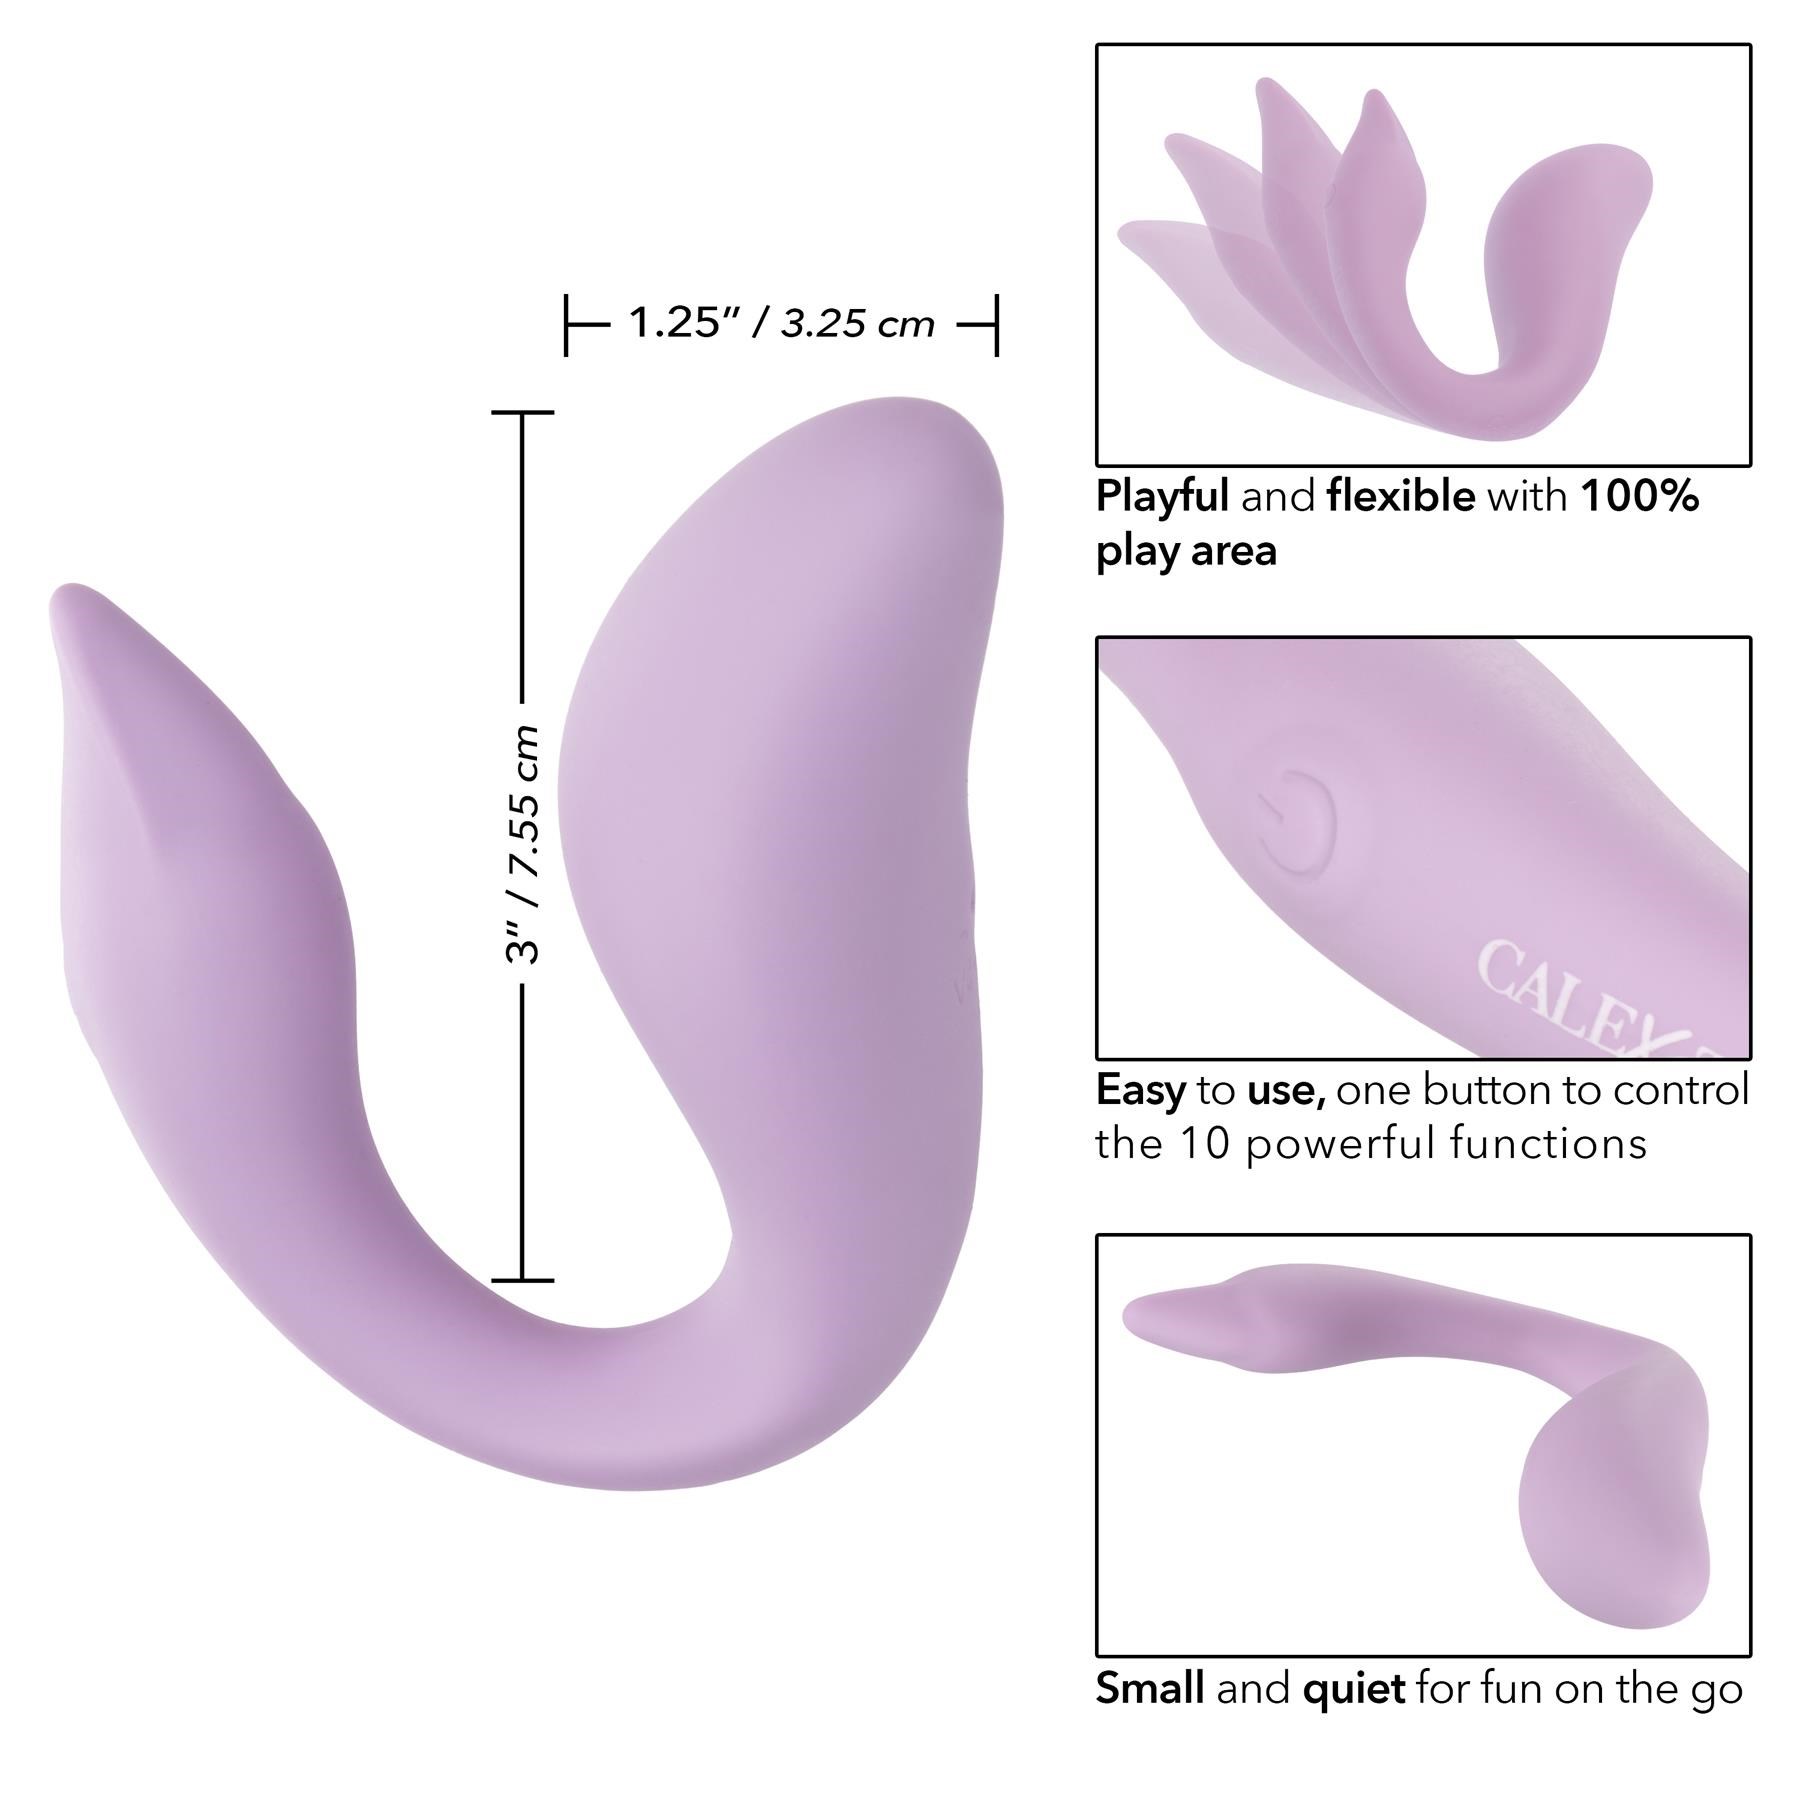 Slay #FlexMe Couples Vibrator - Instructions and Dimensions